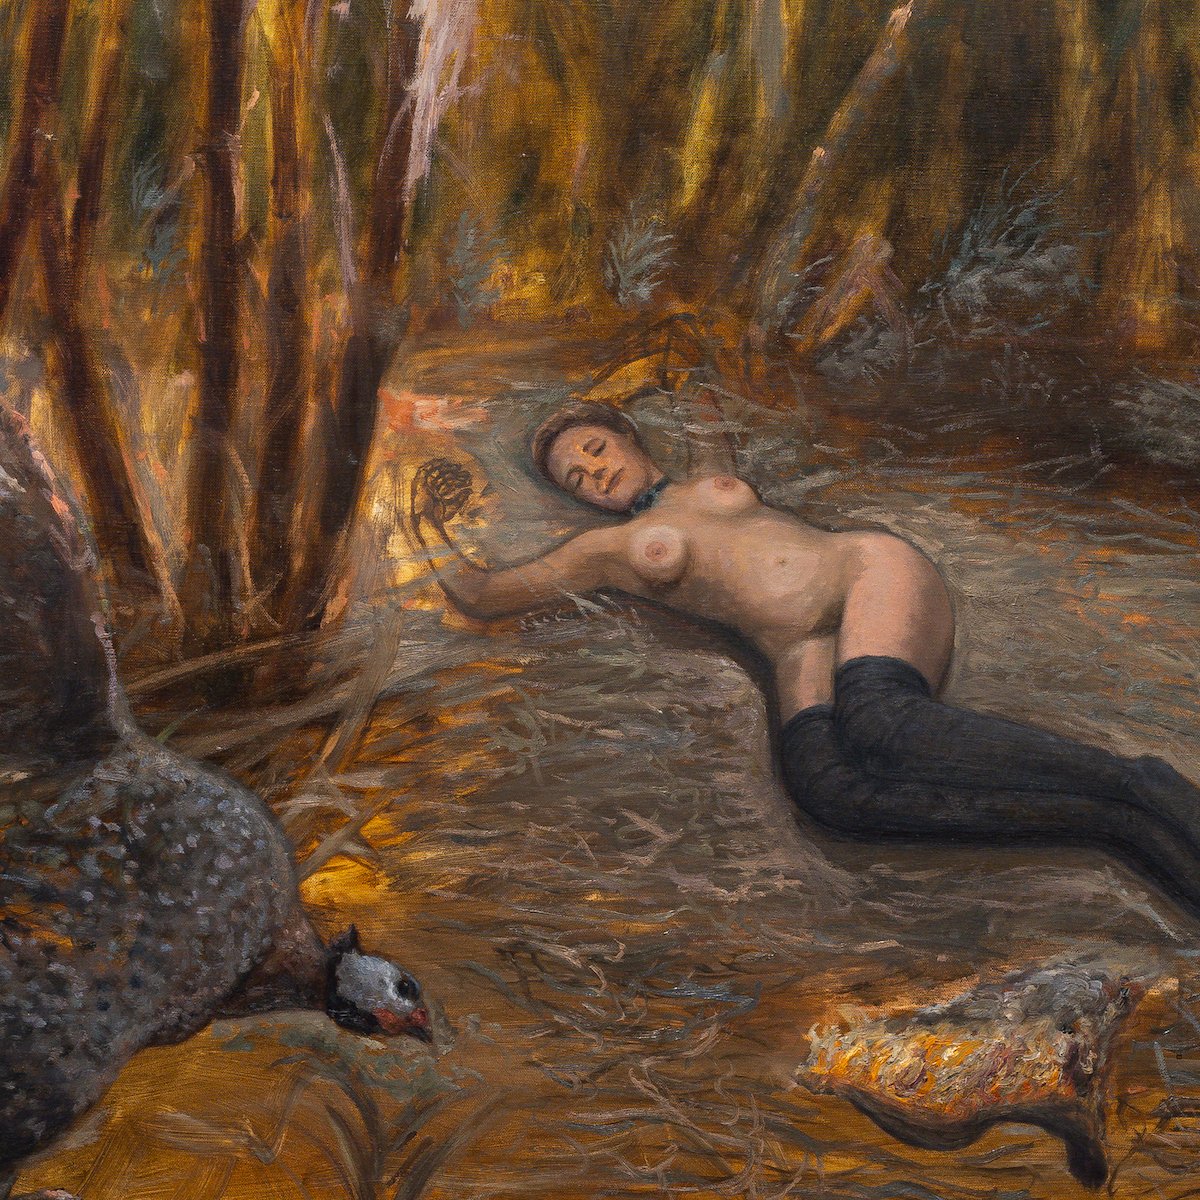 "The River of Paradise" Original Oil Painting of Nude Woman Lying in Lush Jungle by Orlando Almanza @ Soapbox Arts Gallery, Burlington, Vermont